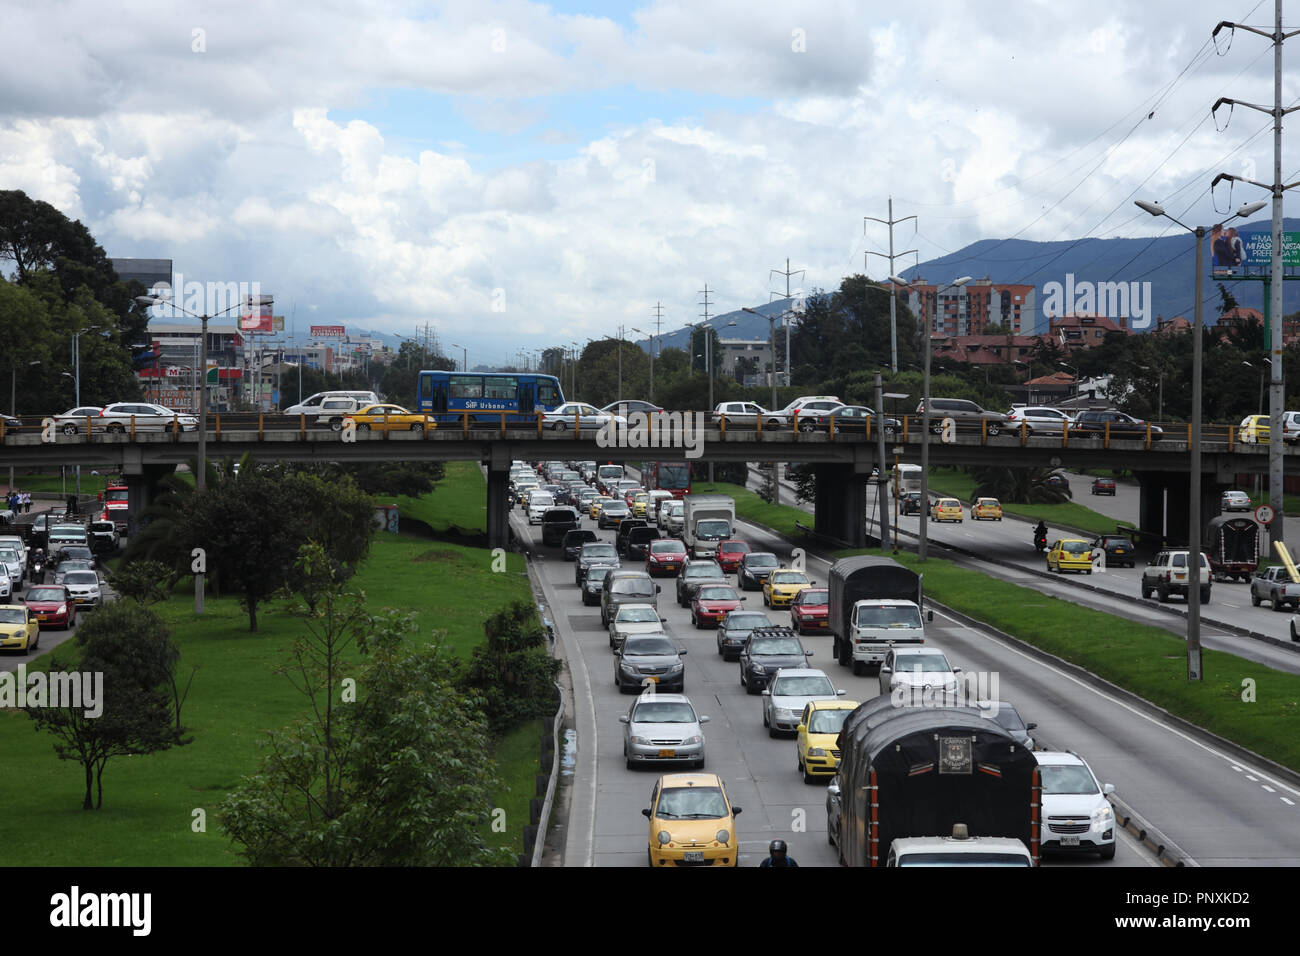 Bogota, Colombia - May 17, 2017: The traffic on the Southbound carriageway is virtually bumper to bumper. The Bridge across the Autopista. Stock Photo